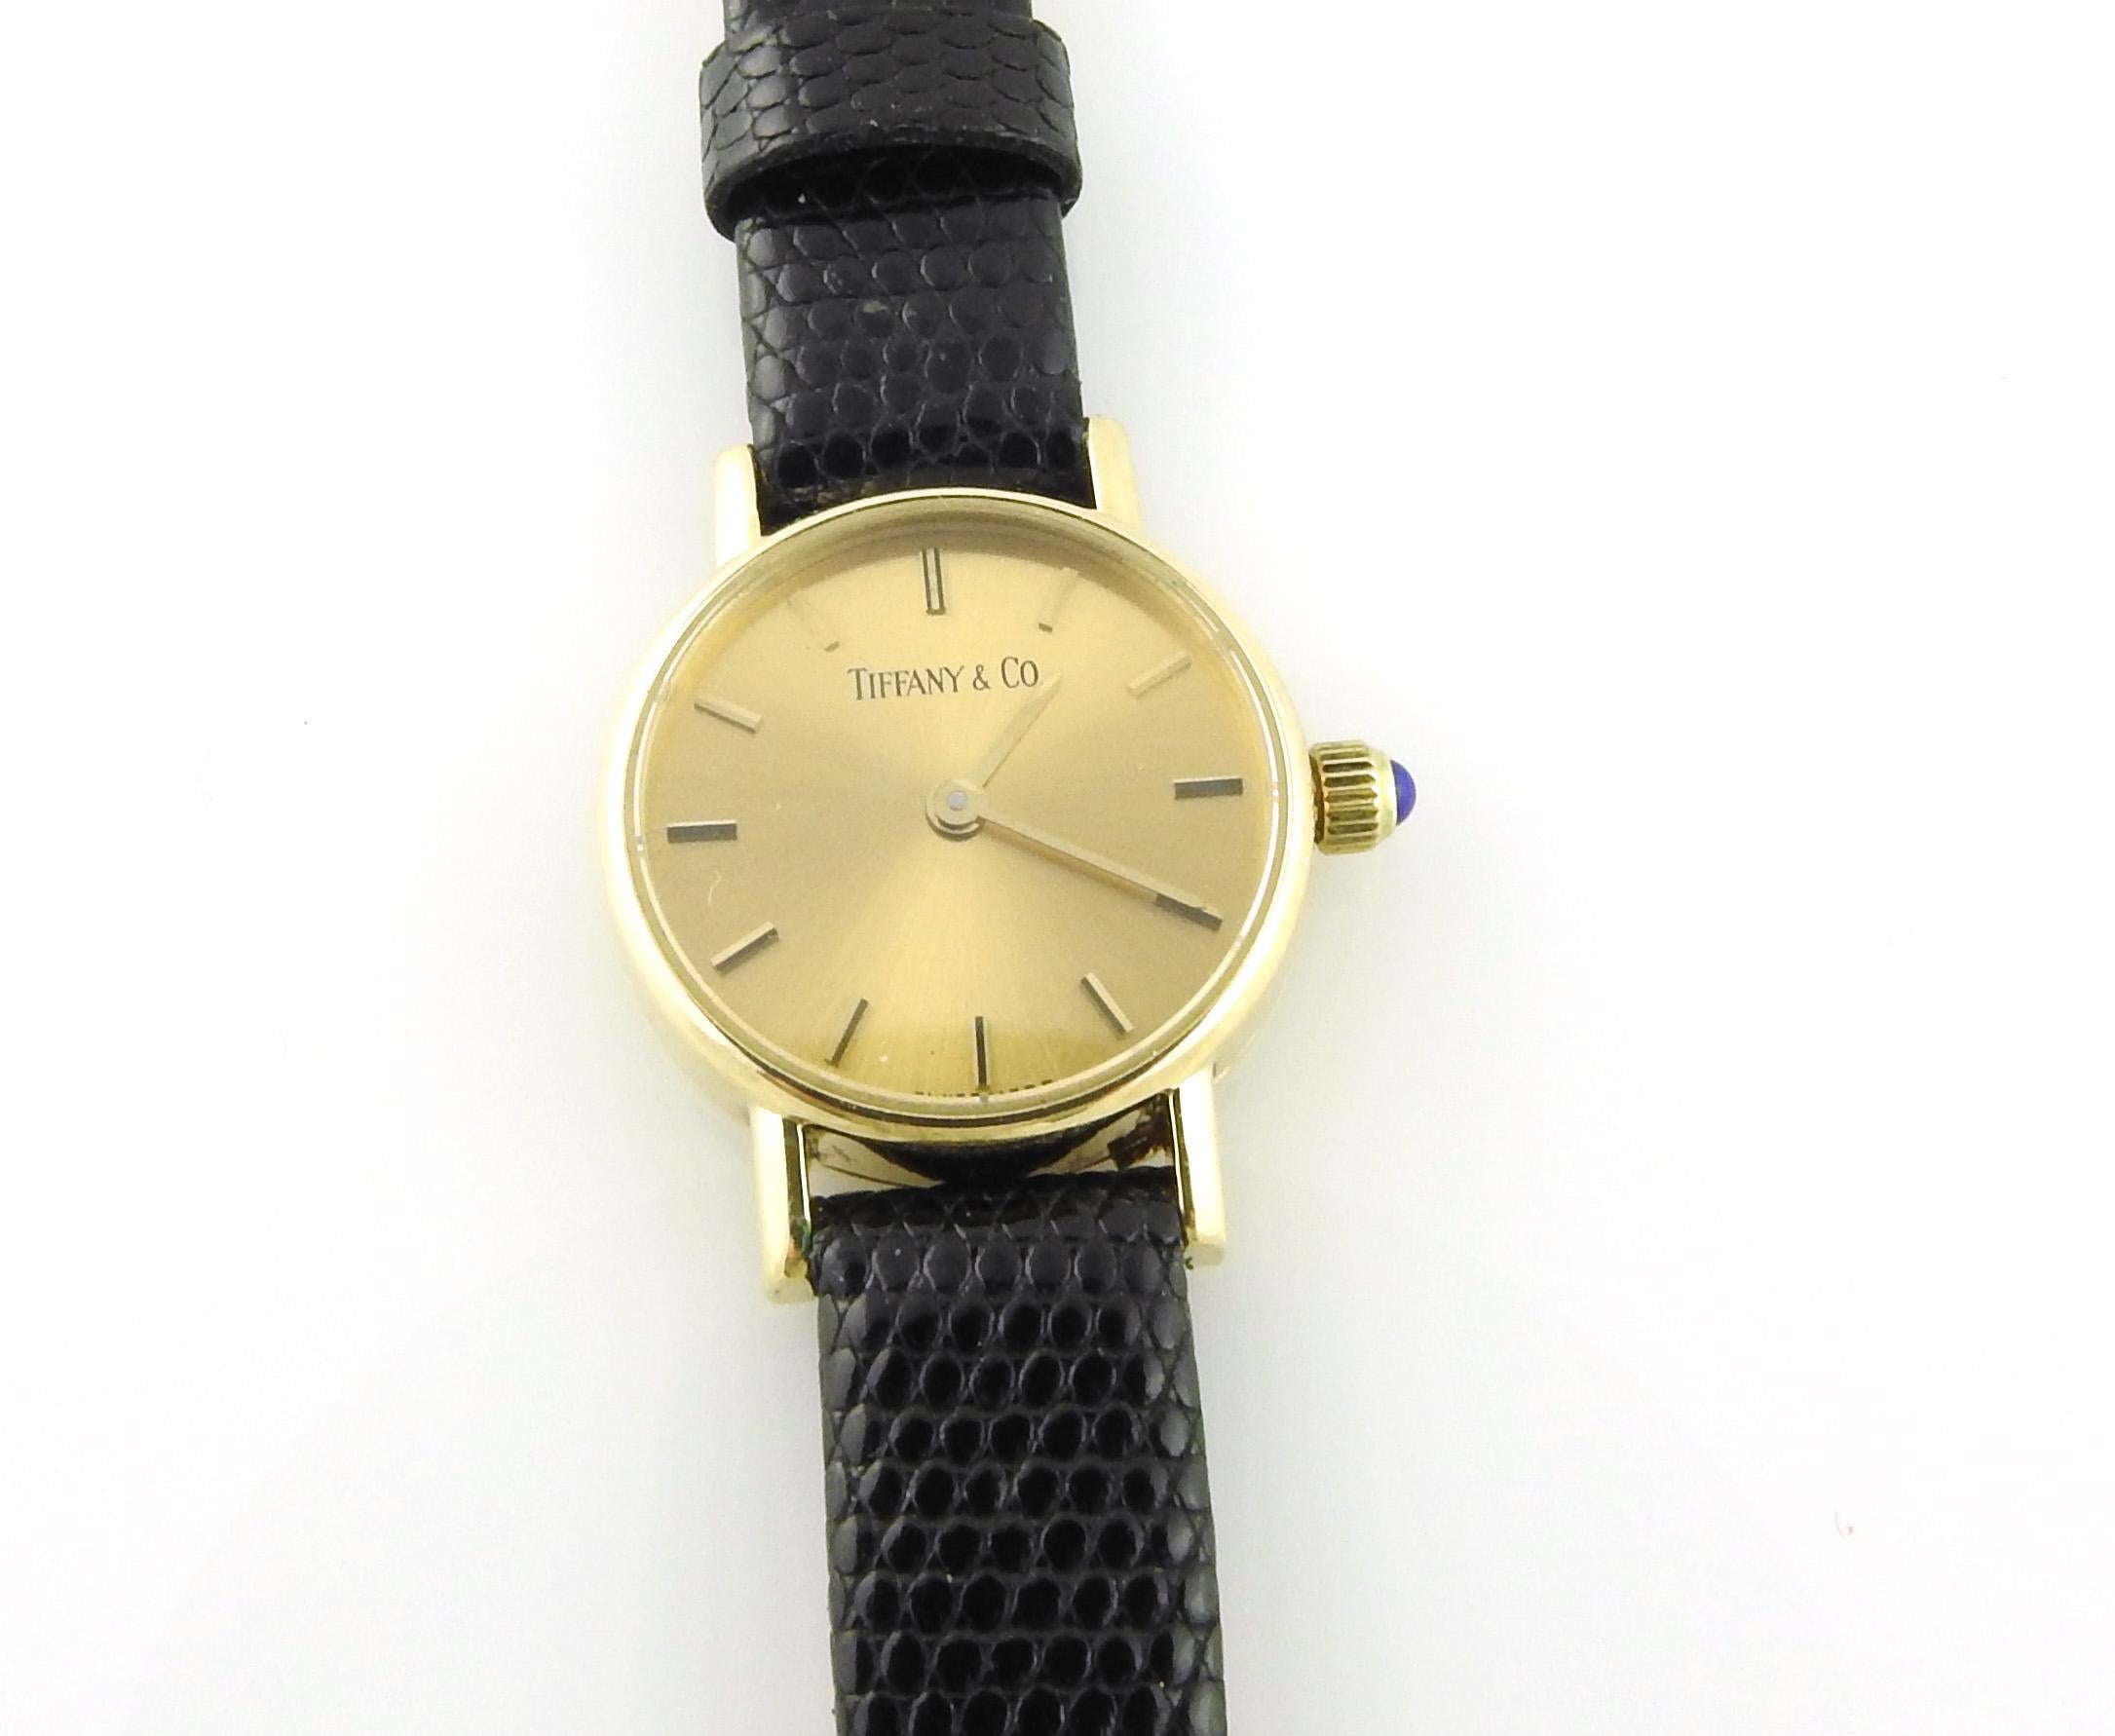 Vintage Tiffany & Co. 14K Yellow Gold Petite Ladies Watch Gold Dial Black Band 1